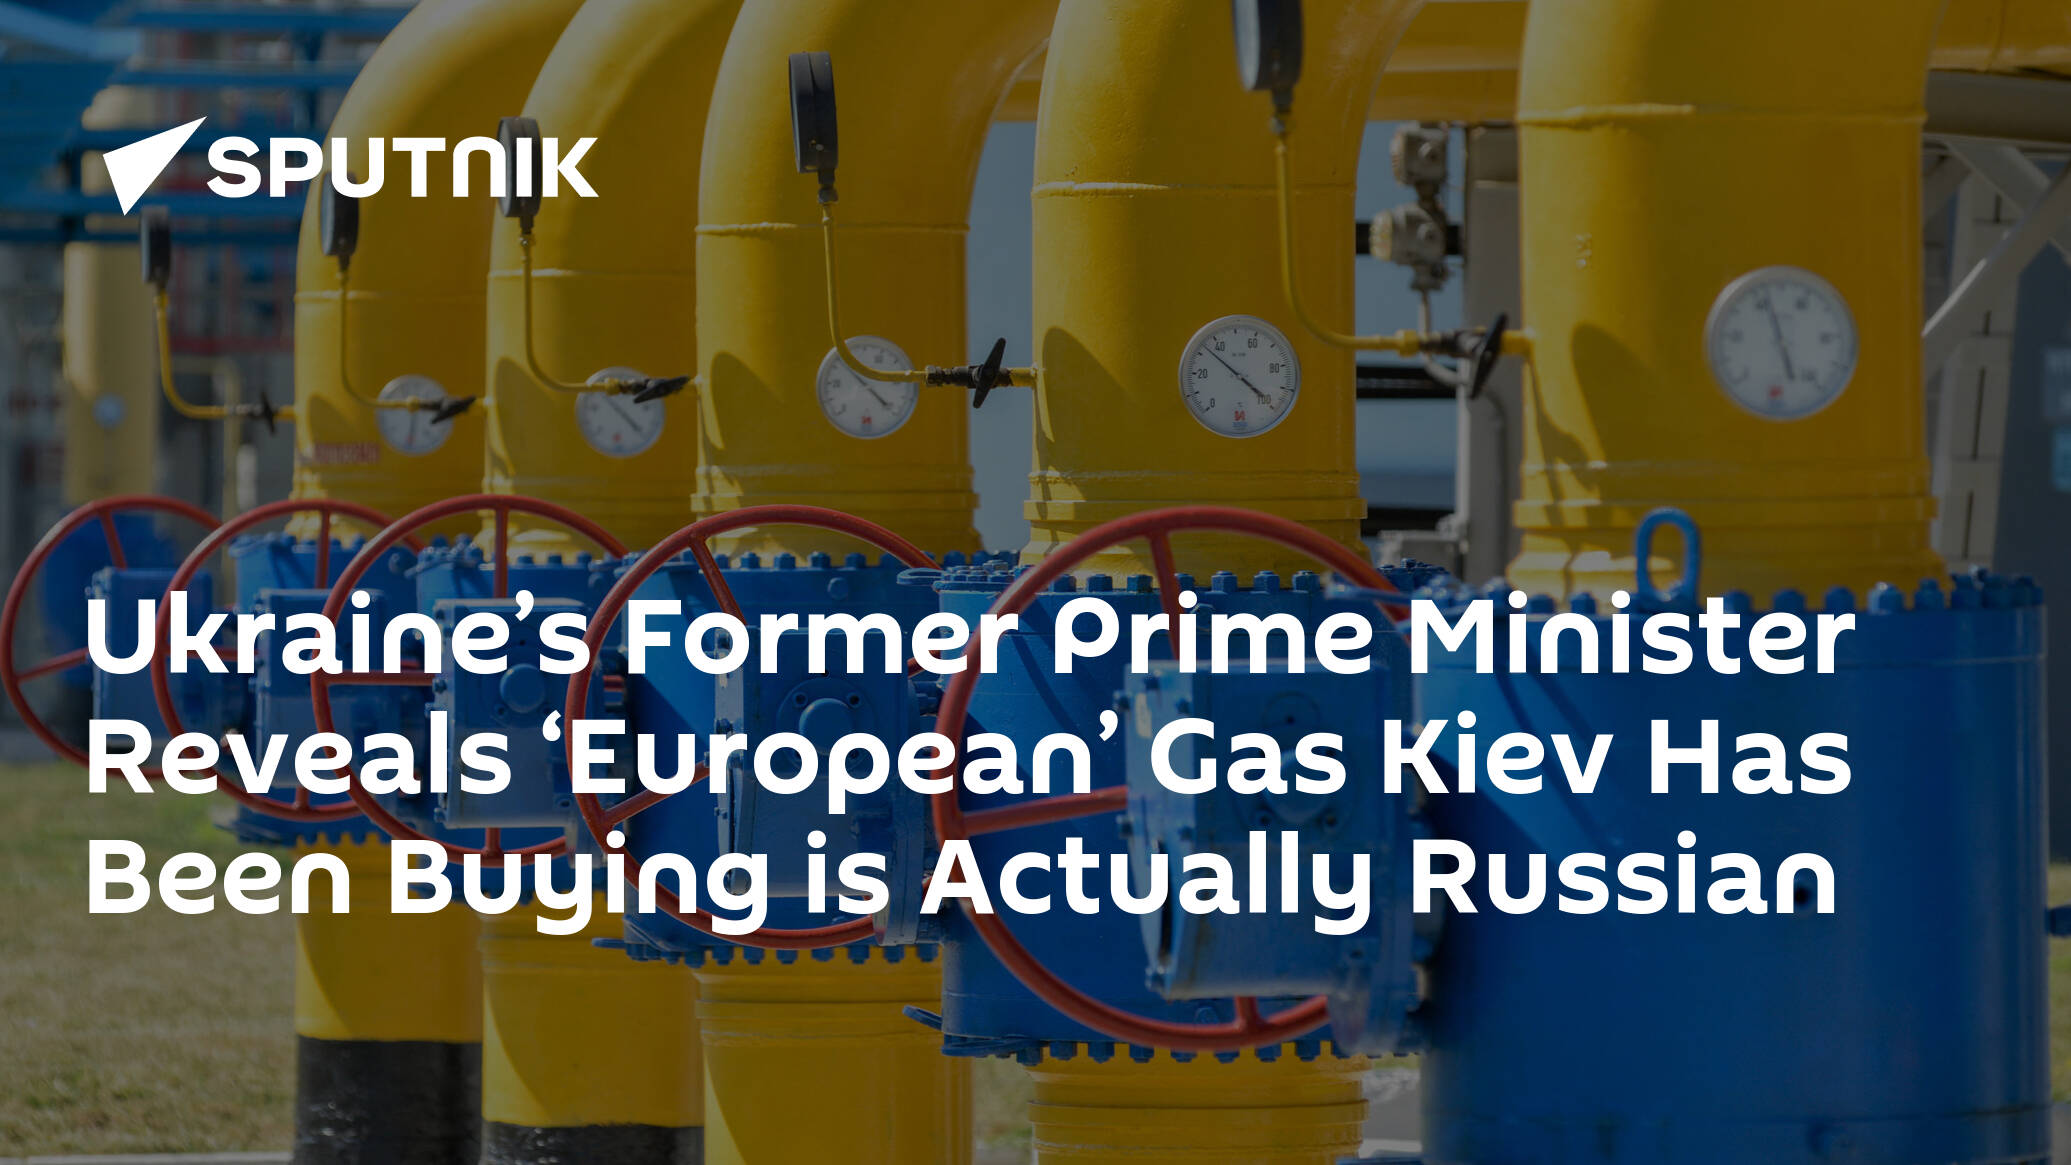 Ukraine’s Former Prime Minister Reveals ‘European’ Gas Kiev Has Been Buying is Actually Russian